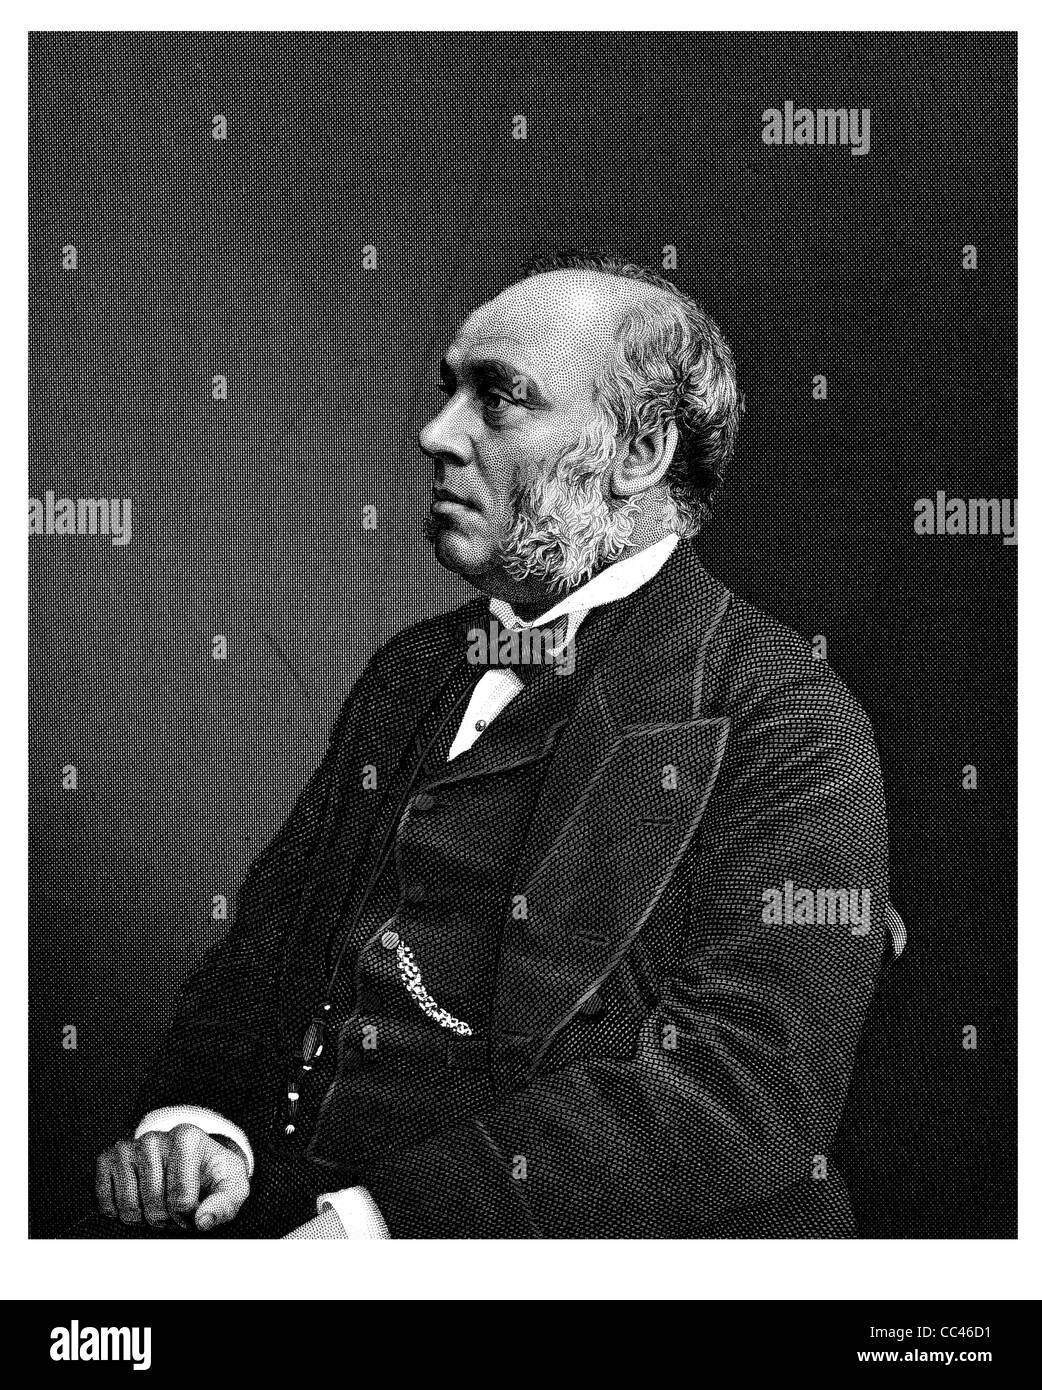 William Henry Smith 1825 1891 English bookseller newsagent W H Smith books newspapers railway stations Leader House Commons Stock Photo